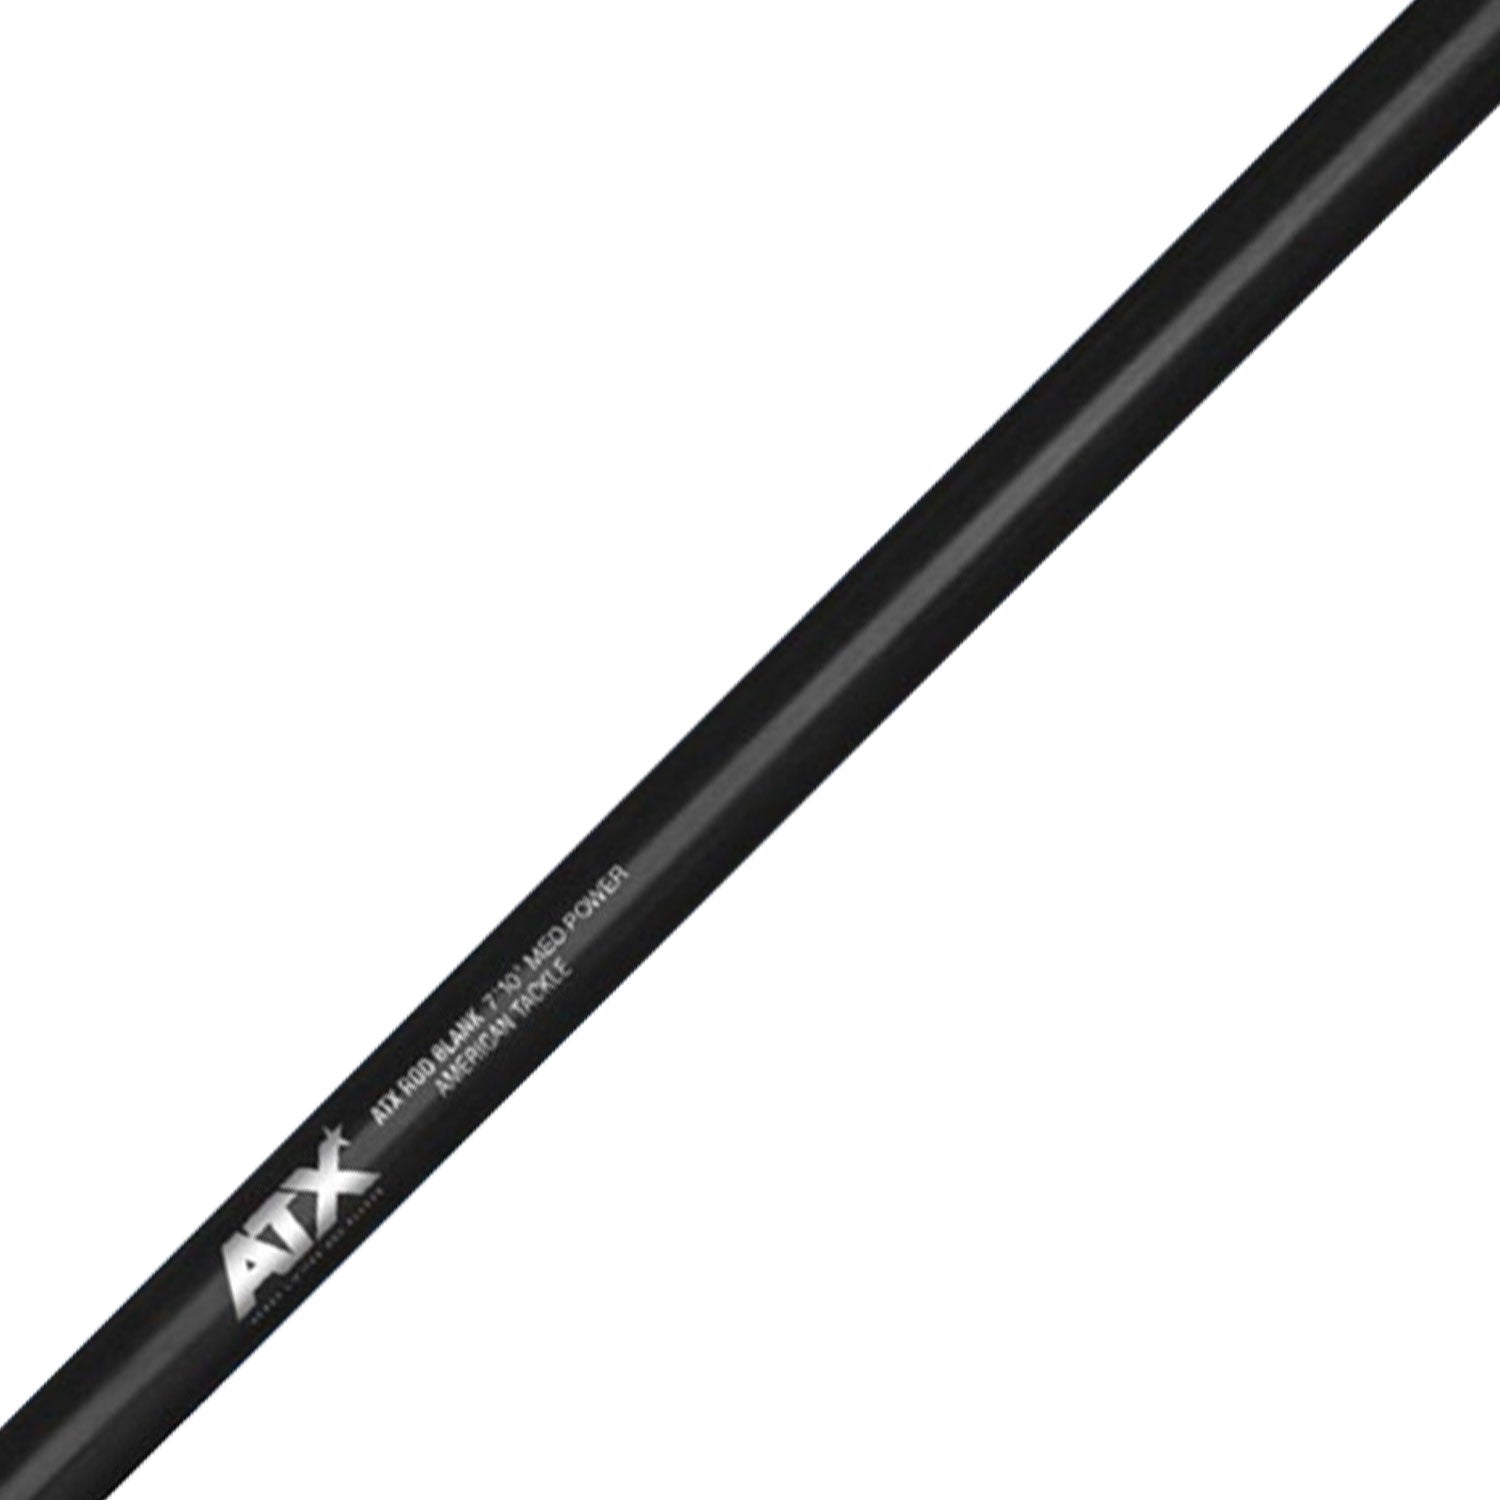 American Tackle AXST60XHS Stand-Up Tuna Rod Blank